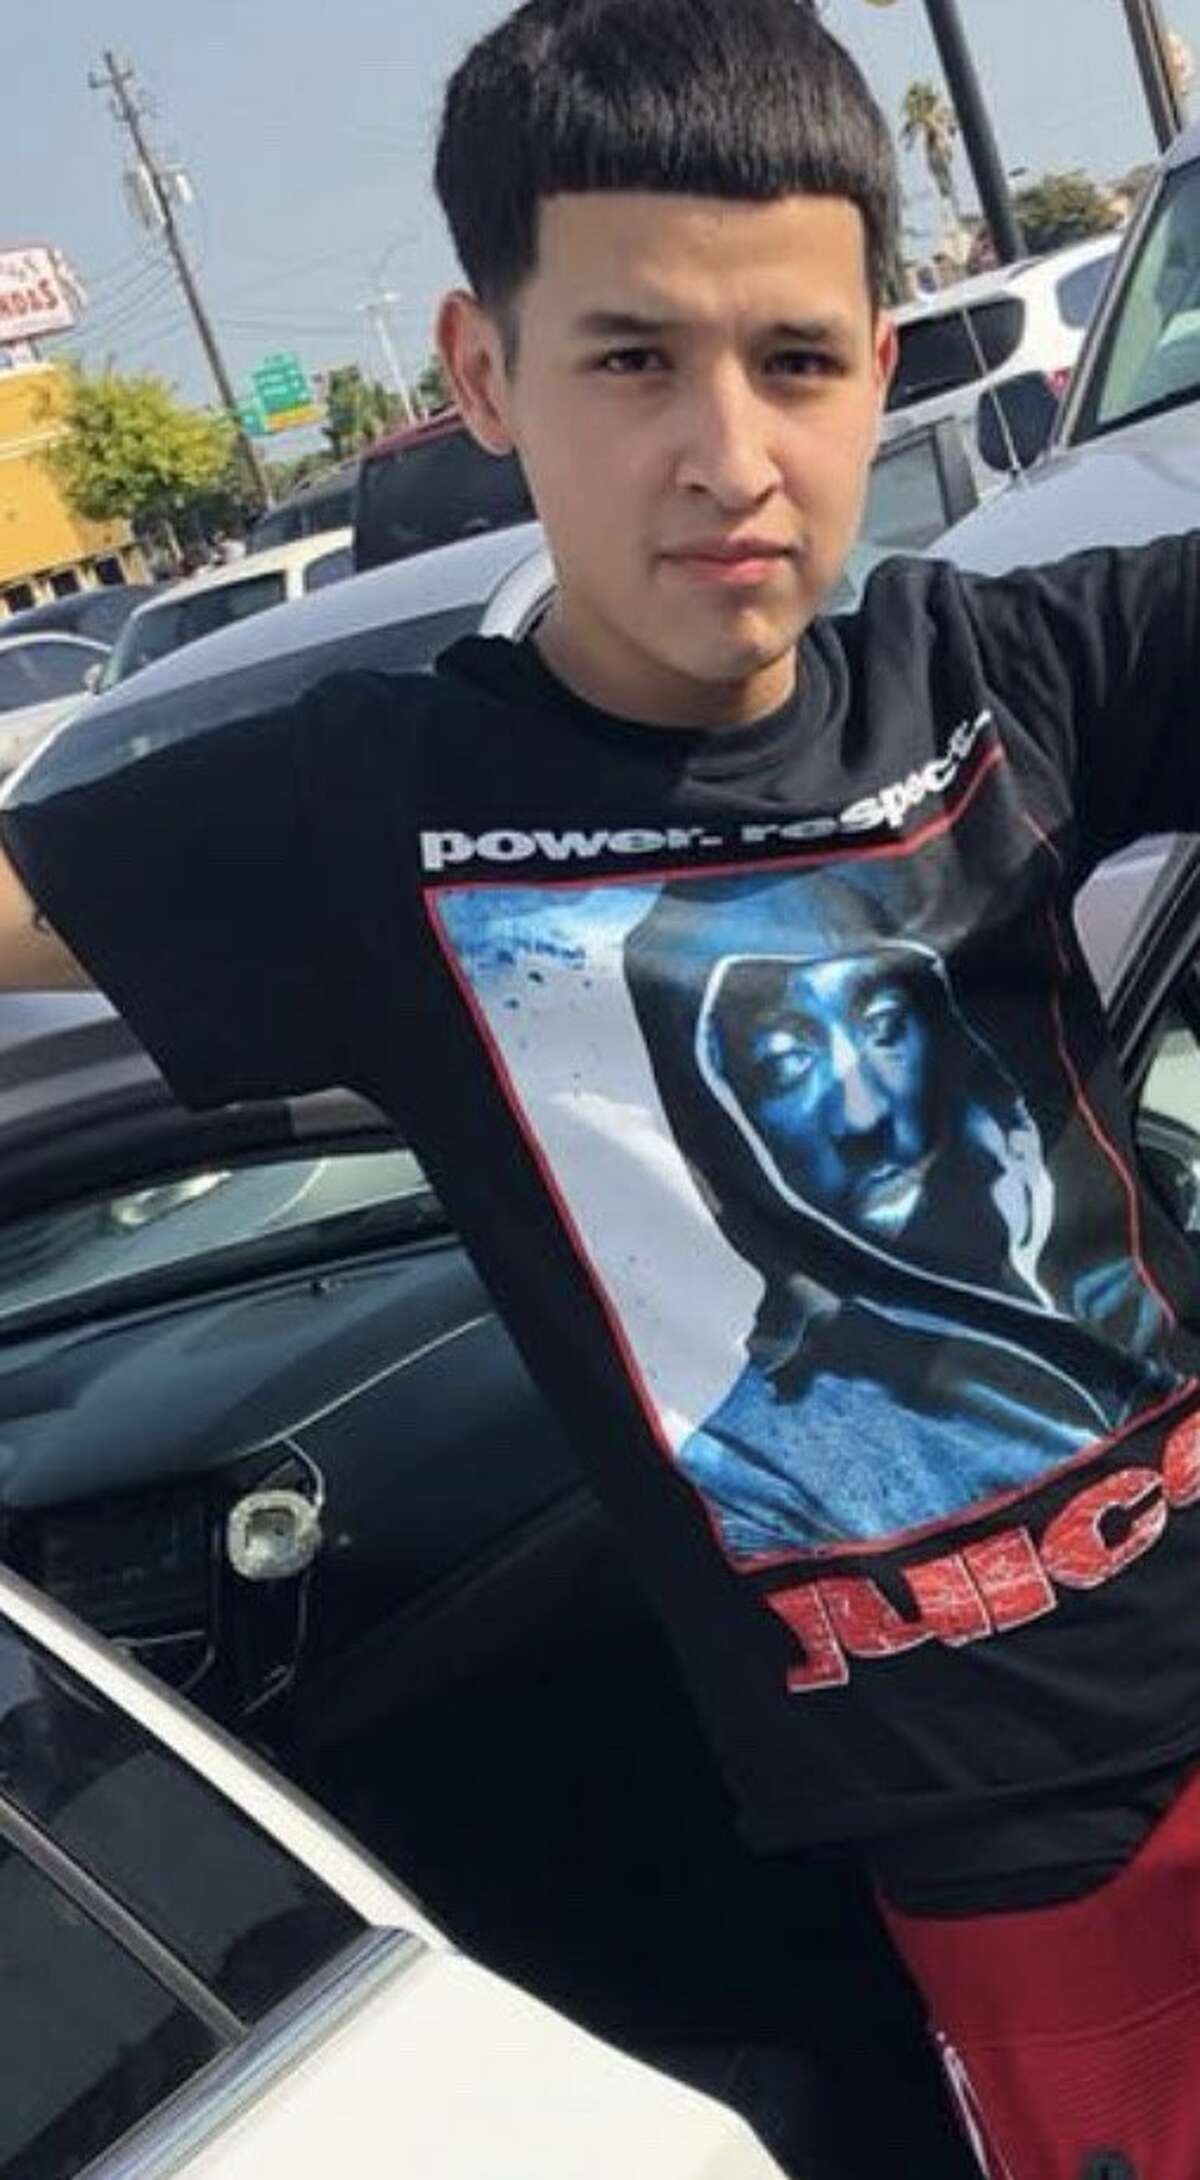 Randy Torres was a 18-year-old Hispanic man who died January 19, 2019 from gunshot wounds at 7041 Sherman Street, Houston.